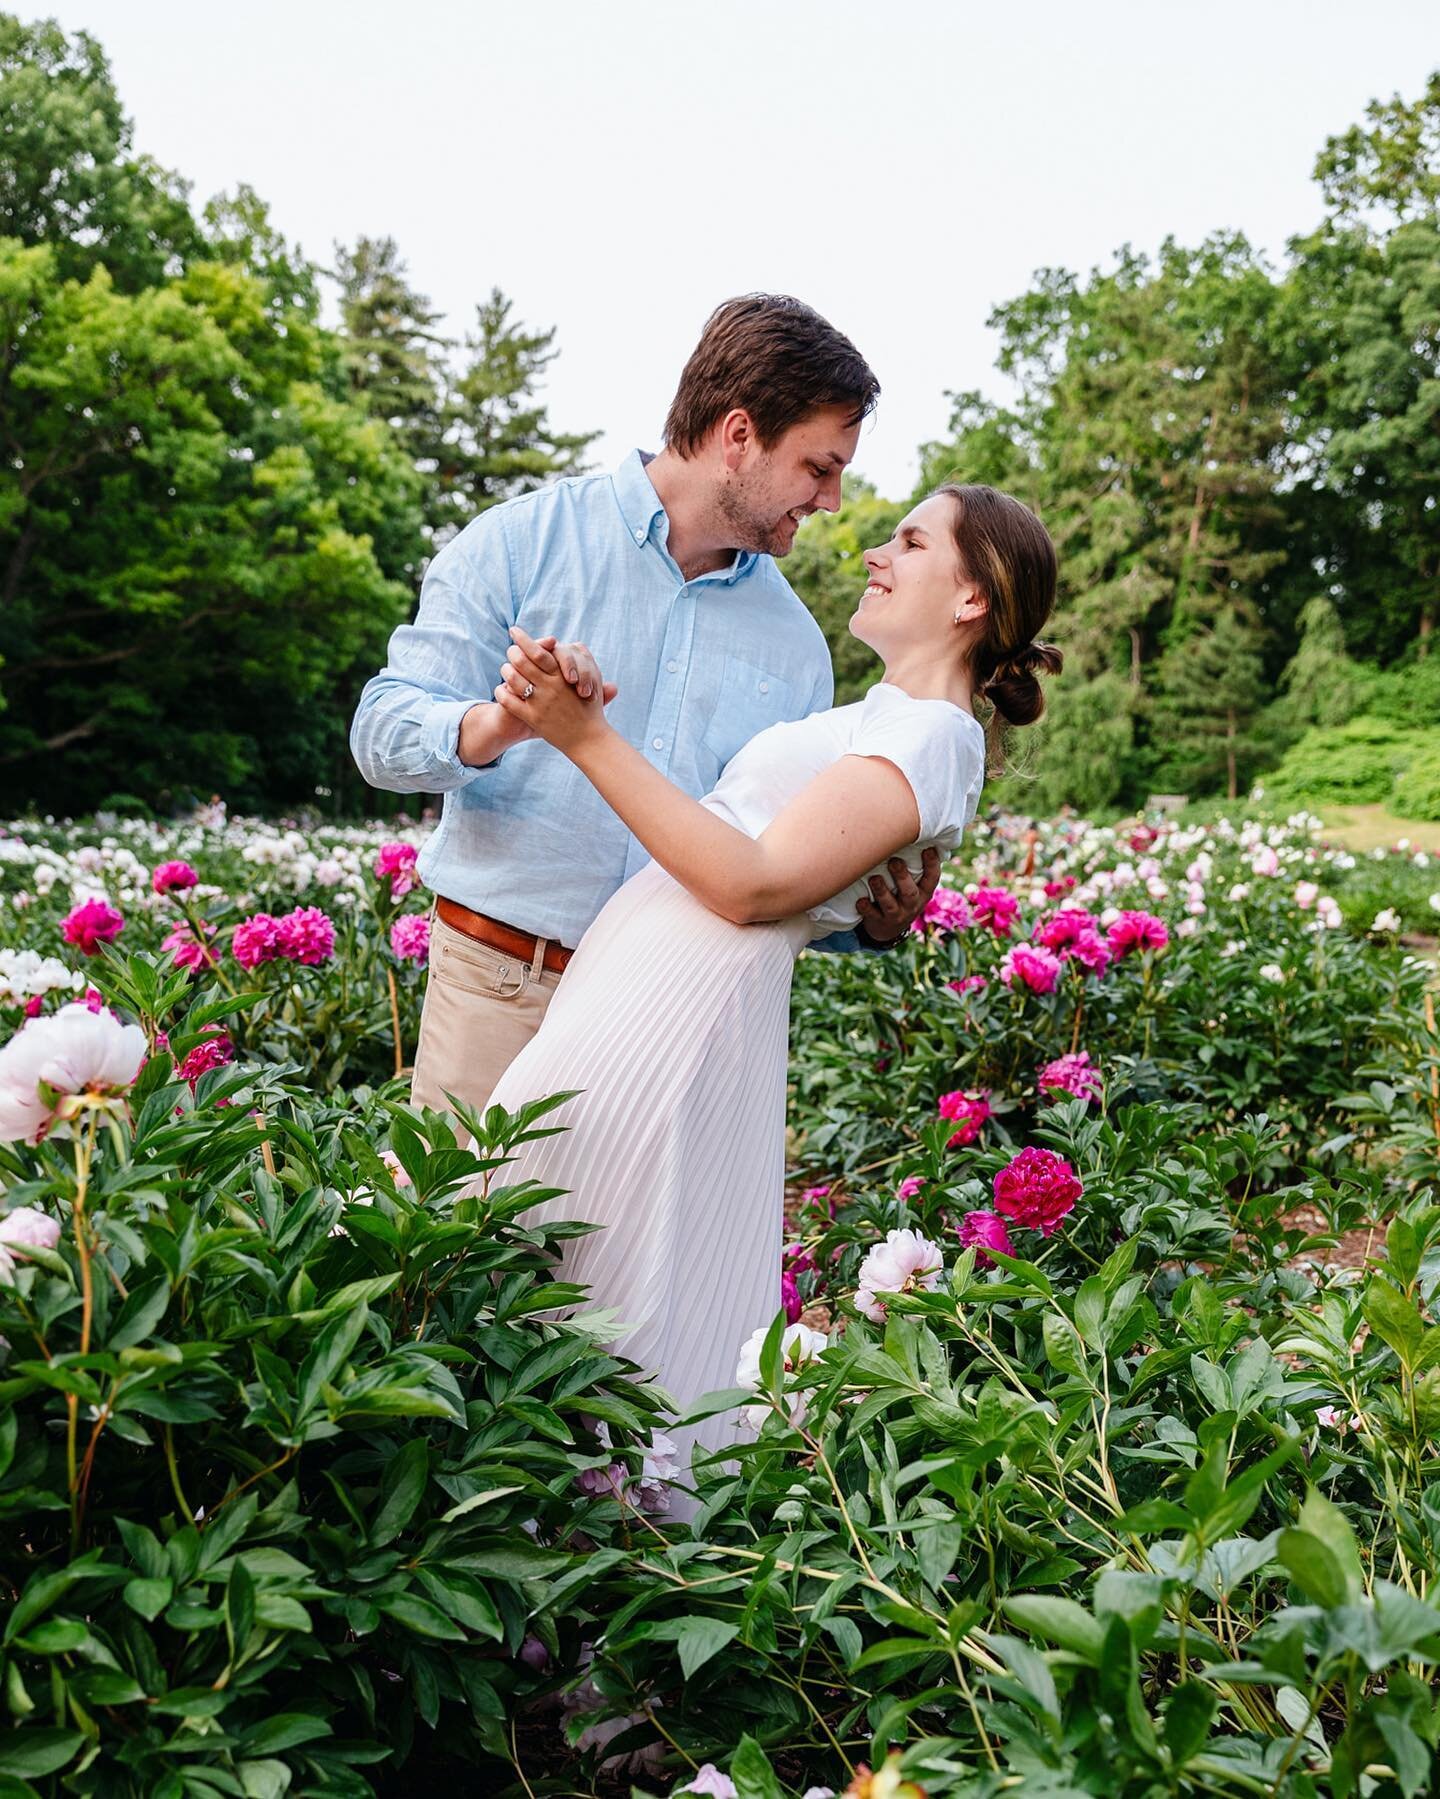 Just delivered recent engagement shoot in @matthaeinichols of Molly and Colby swimming in the sea of summer flowers #annarborphotographer #annarborengagement #nicholsarboretumpeonygarden #peonies